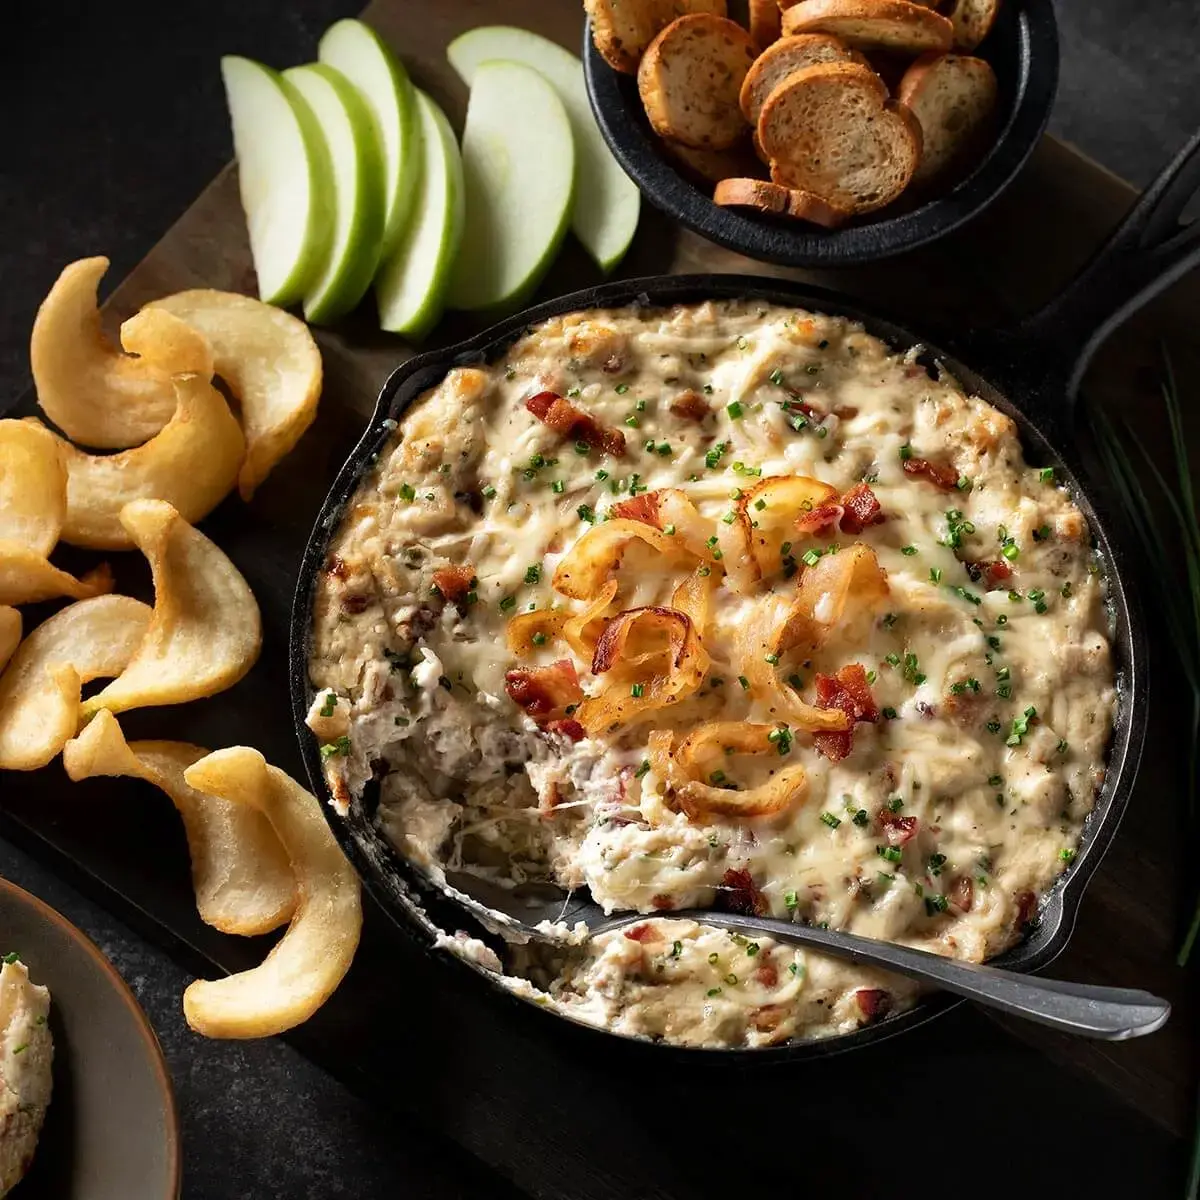 Warm Gruyere, Bacon and Caramelized Onion Dip Recipe Card